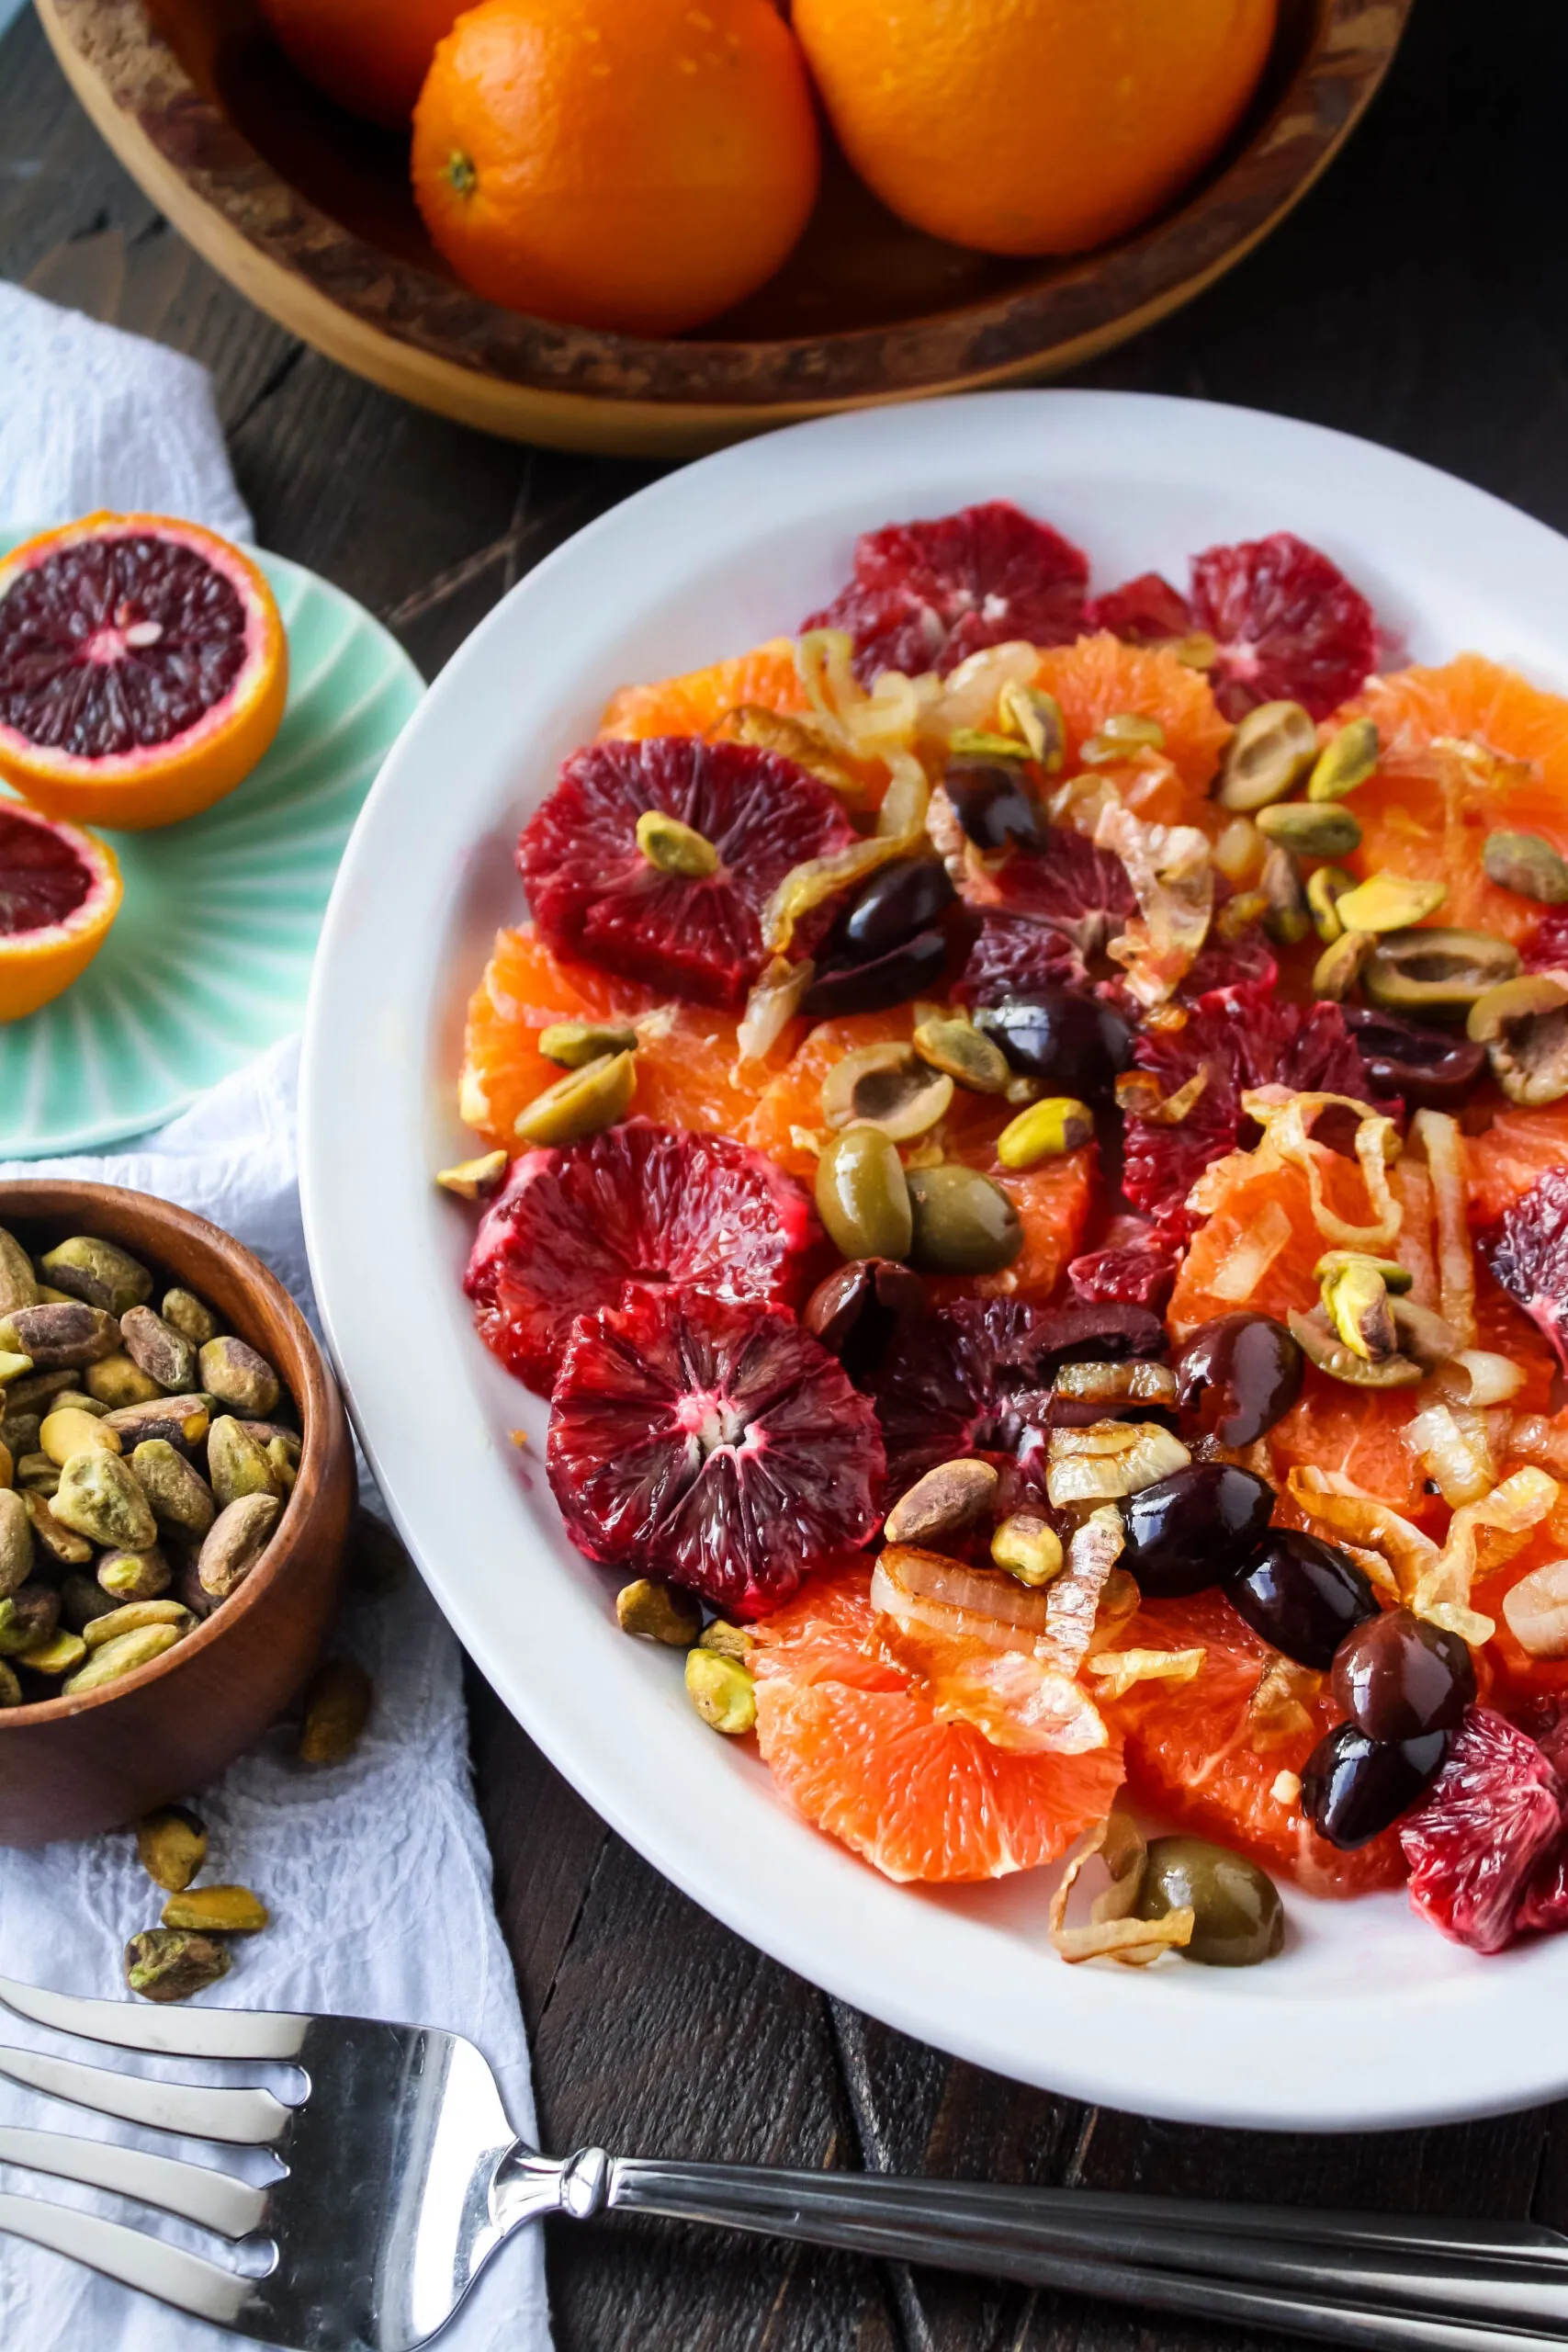 Blood Orange Salad with Shallots & Olives is bright and colorful with jewel-like oranges.